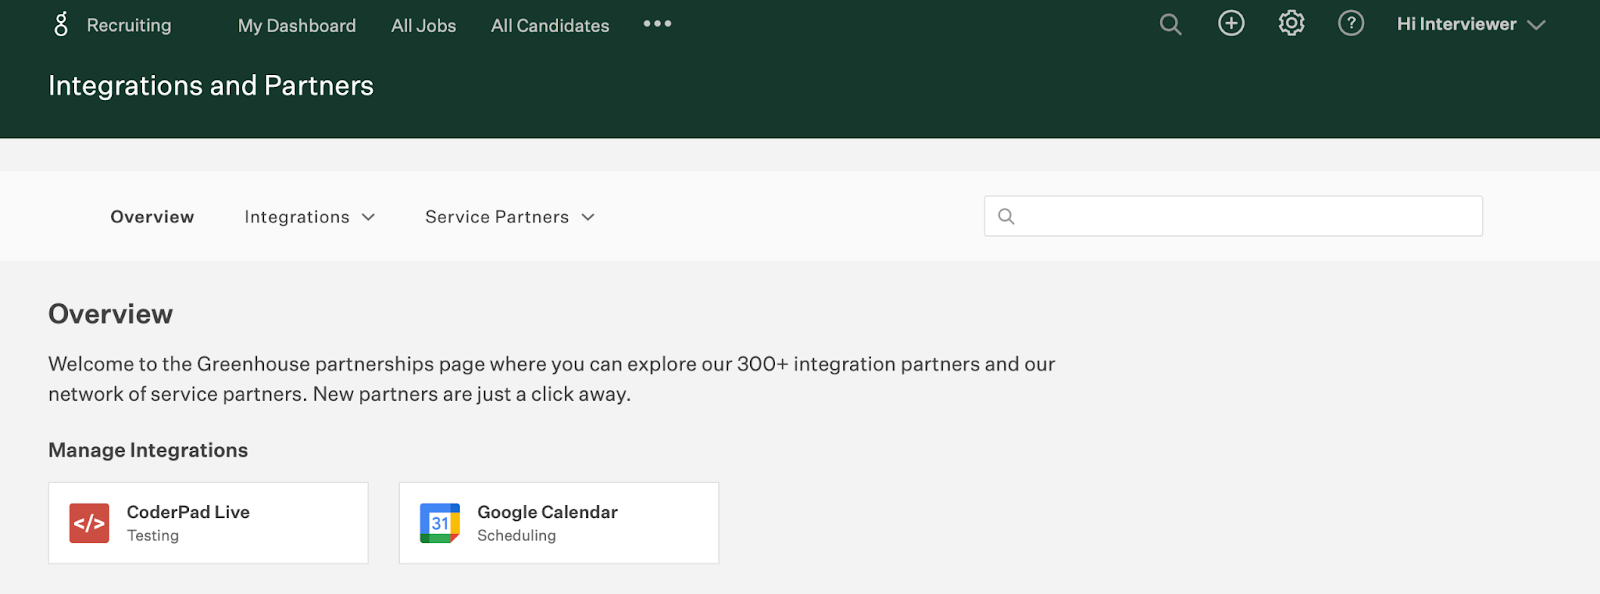 On the integrations and partners page the overview section is shown and the CoderPad Live and Google Calendar integrations are displayed.